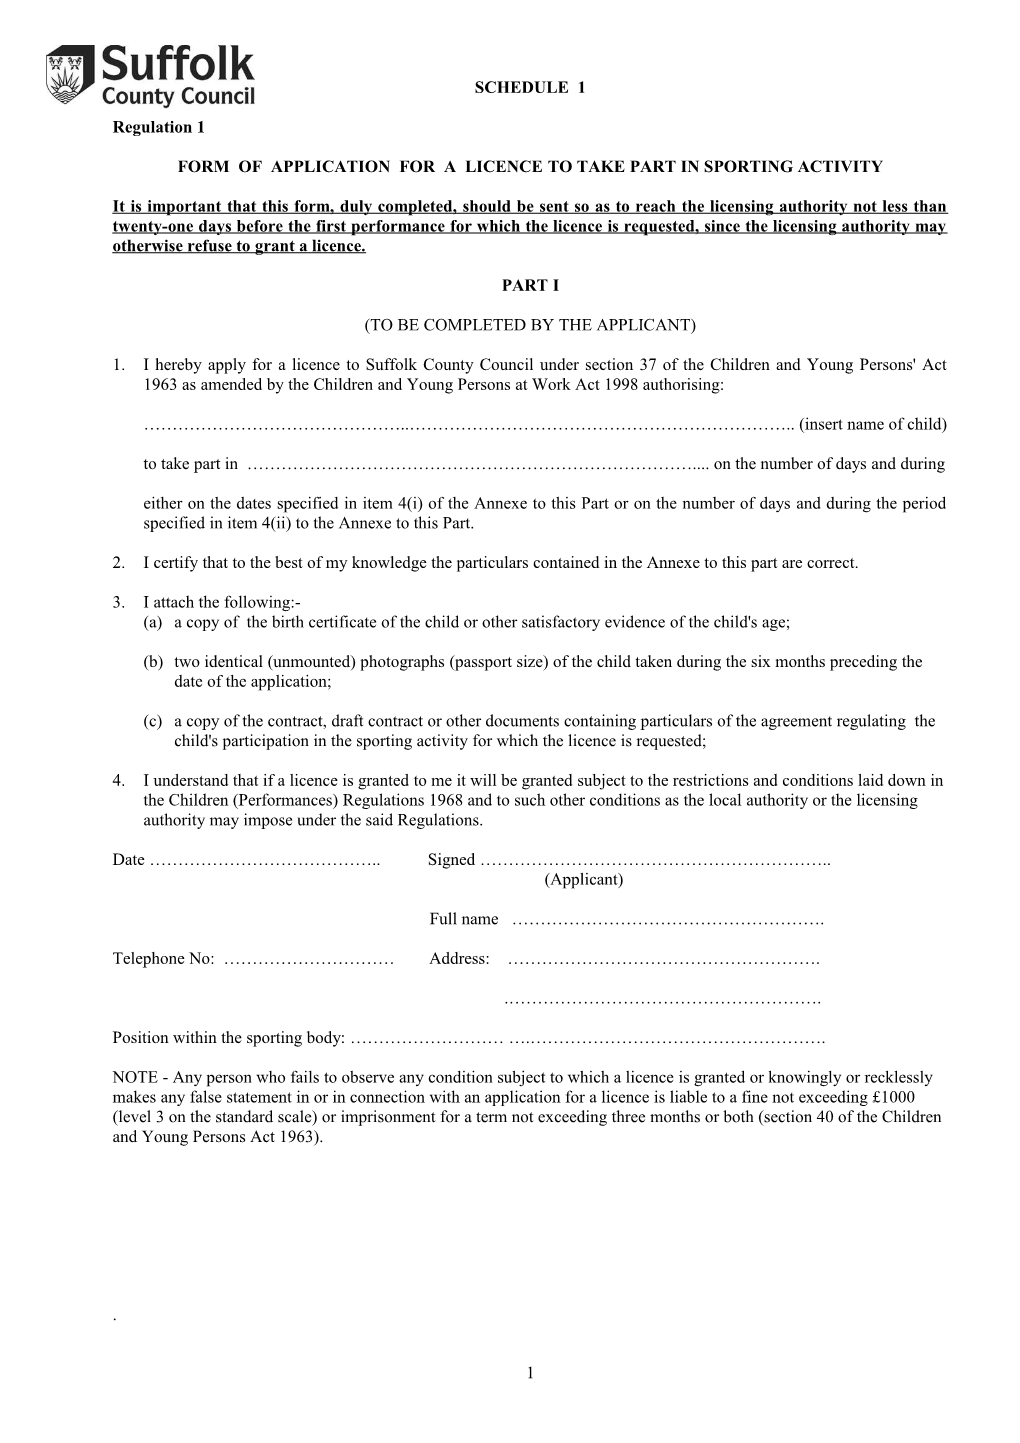 Form of Application for a Licence to Take Part in Sporting Activity